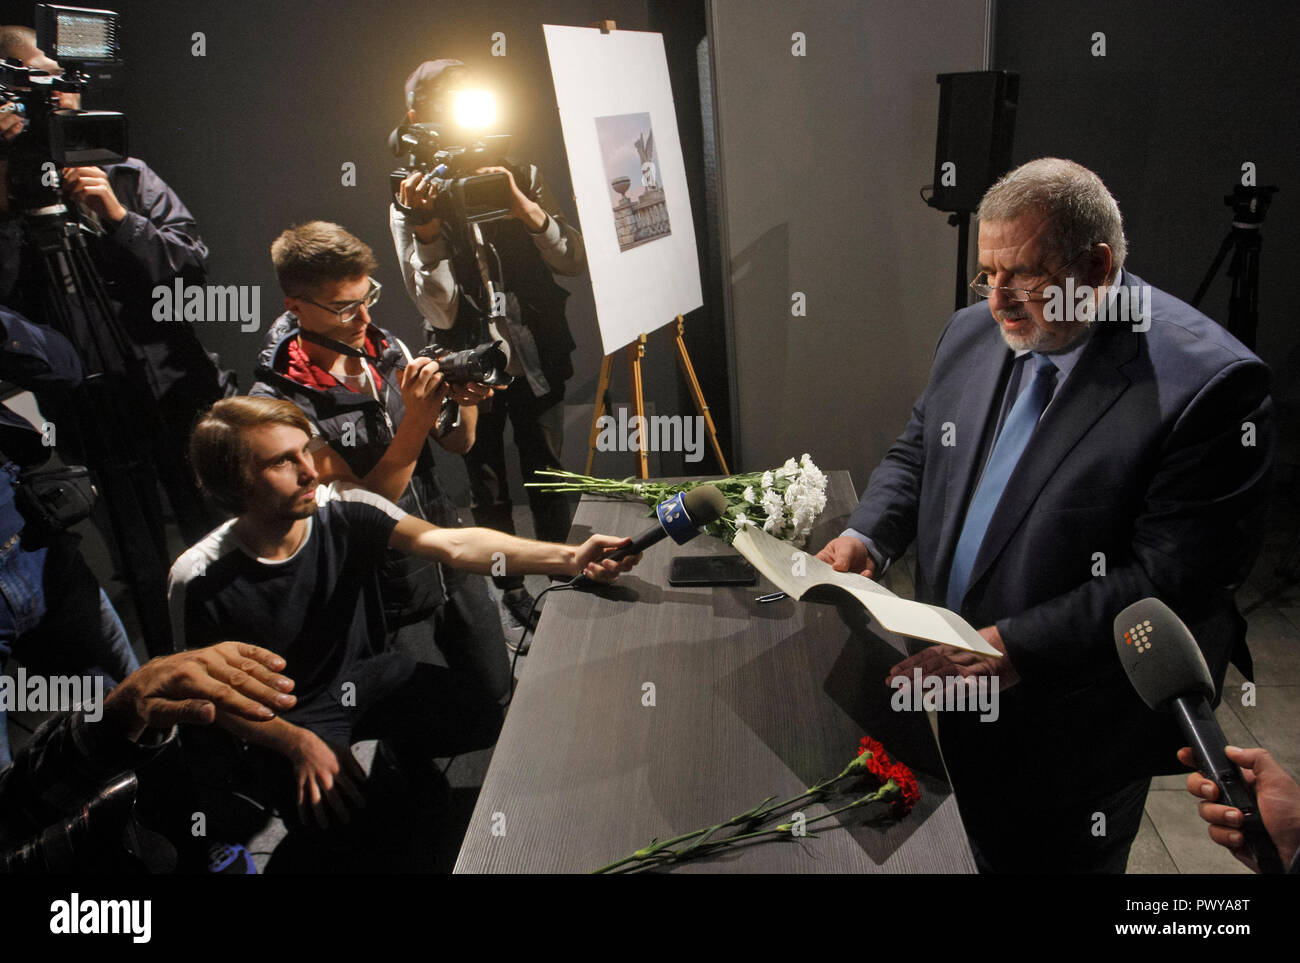 Refat Chubarov, leader of the Crimean Tatar national movement in Ukraine and worldwide is seen speaking with media after signing a condolence book as a sign of mourning to the victims of the attack during the commemoration. Commemorating the victims of an 18-year-old student who strode into his vocational college in Kerch in the Crimea, then pulled out a shotgun and opened fire, killing about 20 students and teachers and wounding about 74 others before killing himself, according the media. Stock Photo